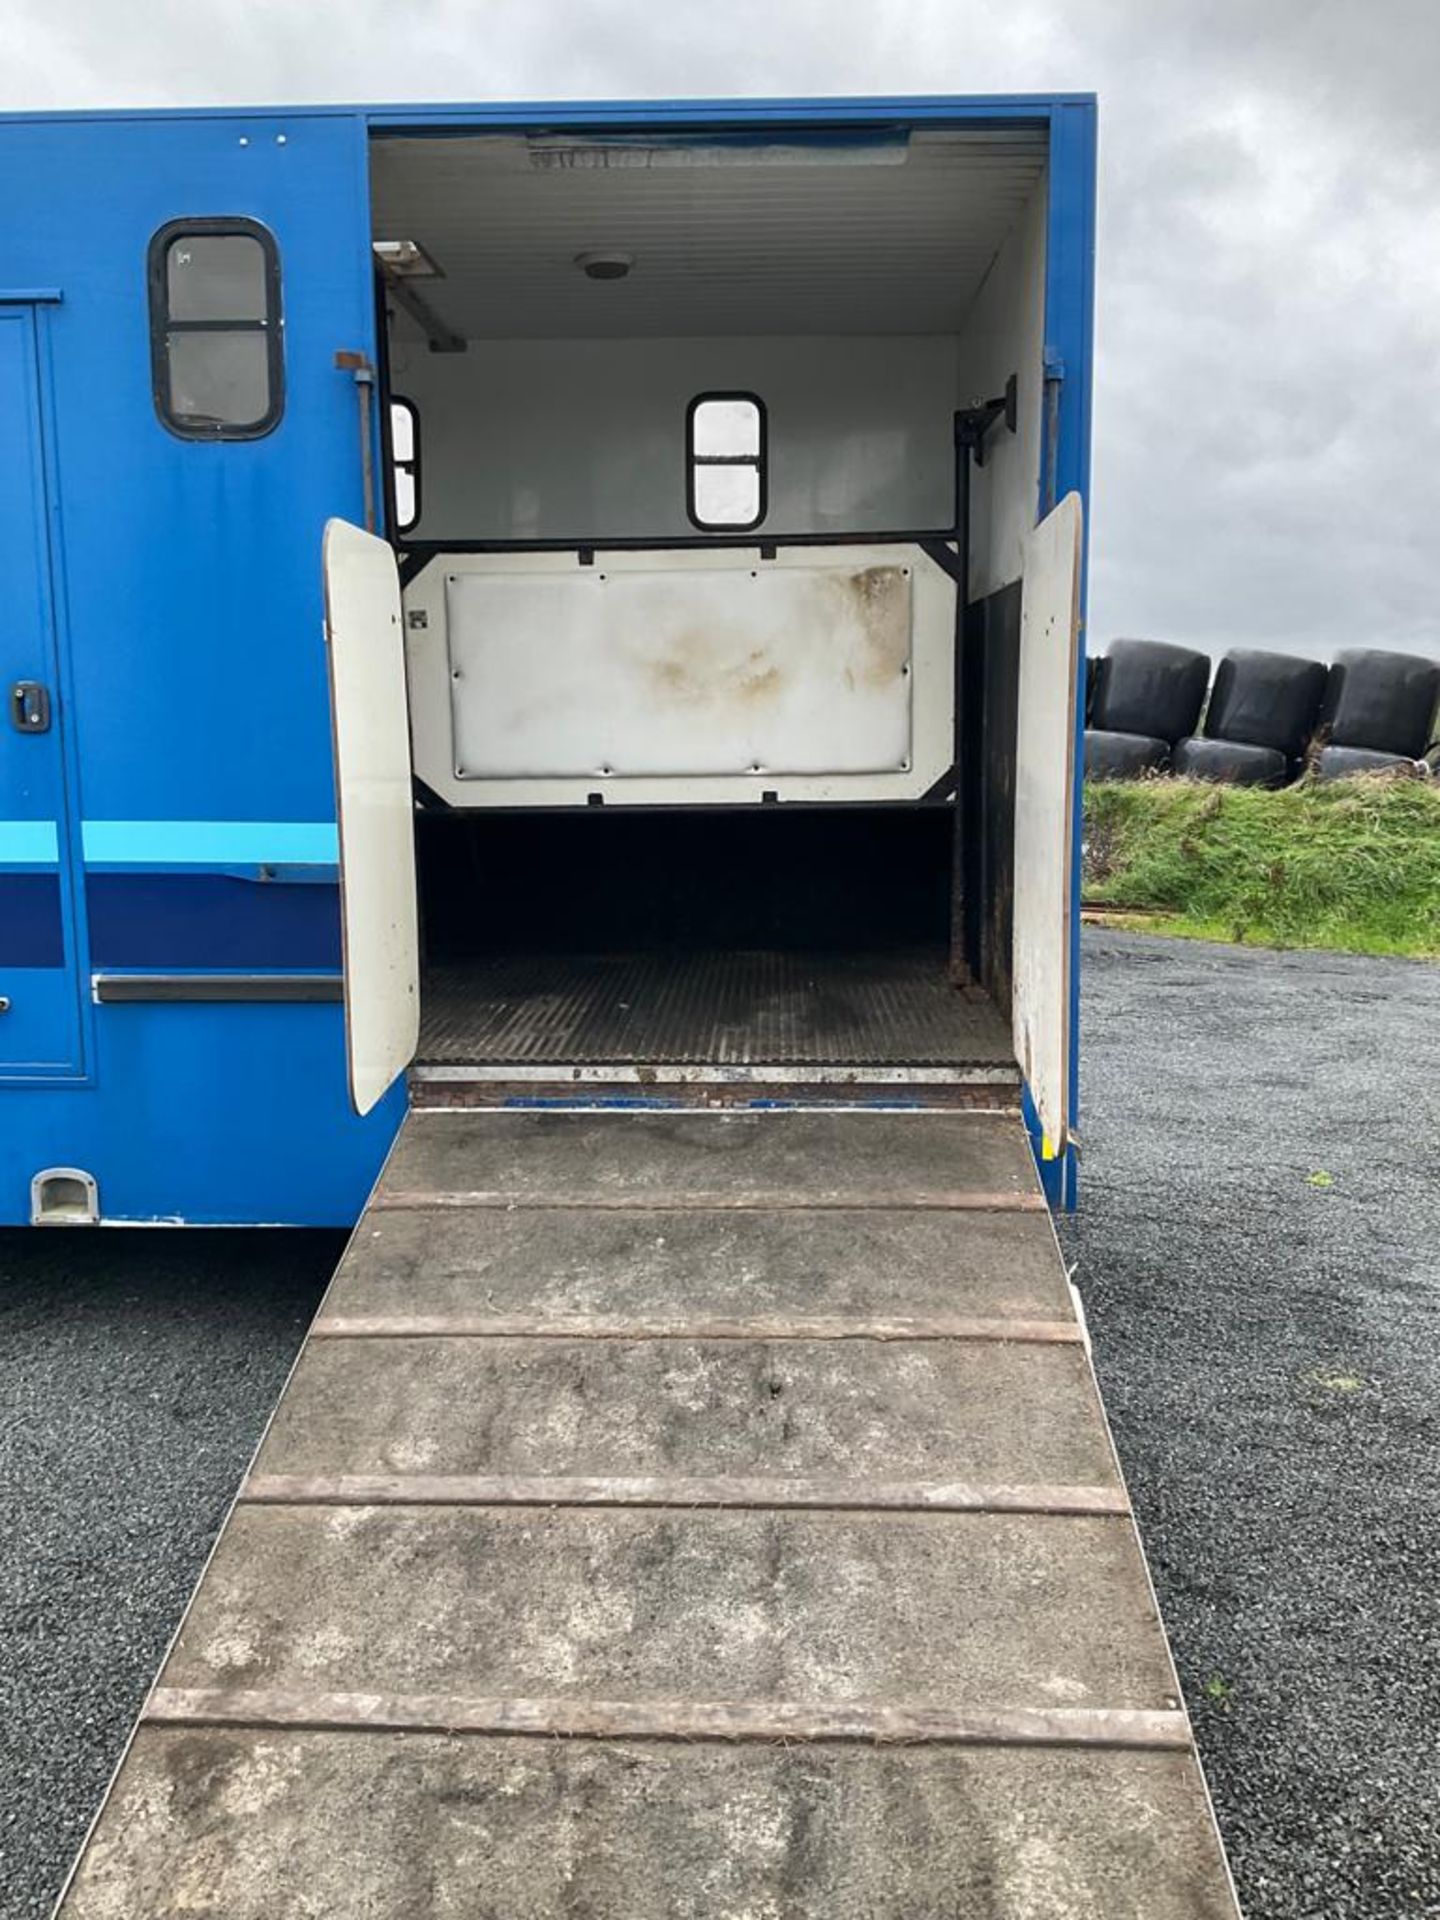 IVECO TWO HORSEBOX.LOCATION NORTHERN IRELAND - Image 4 of 10